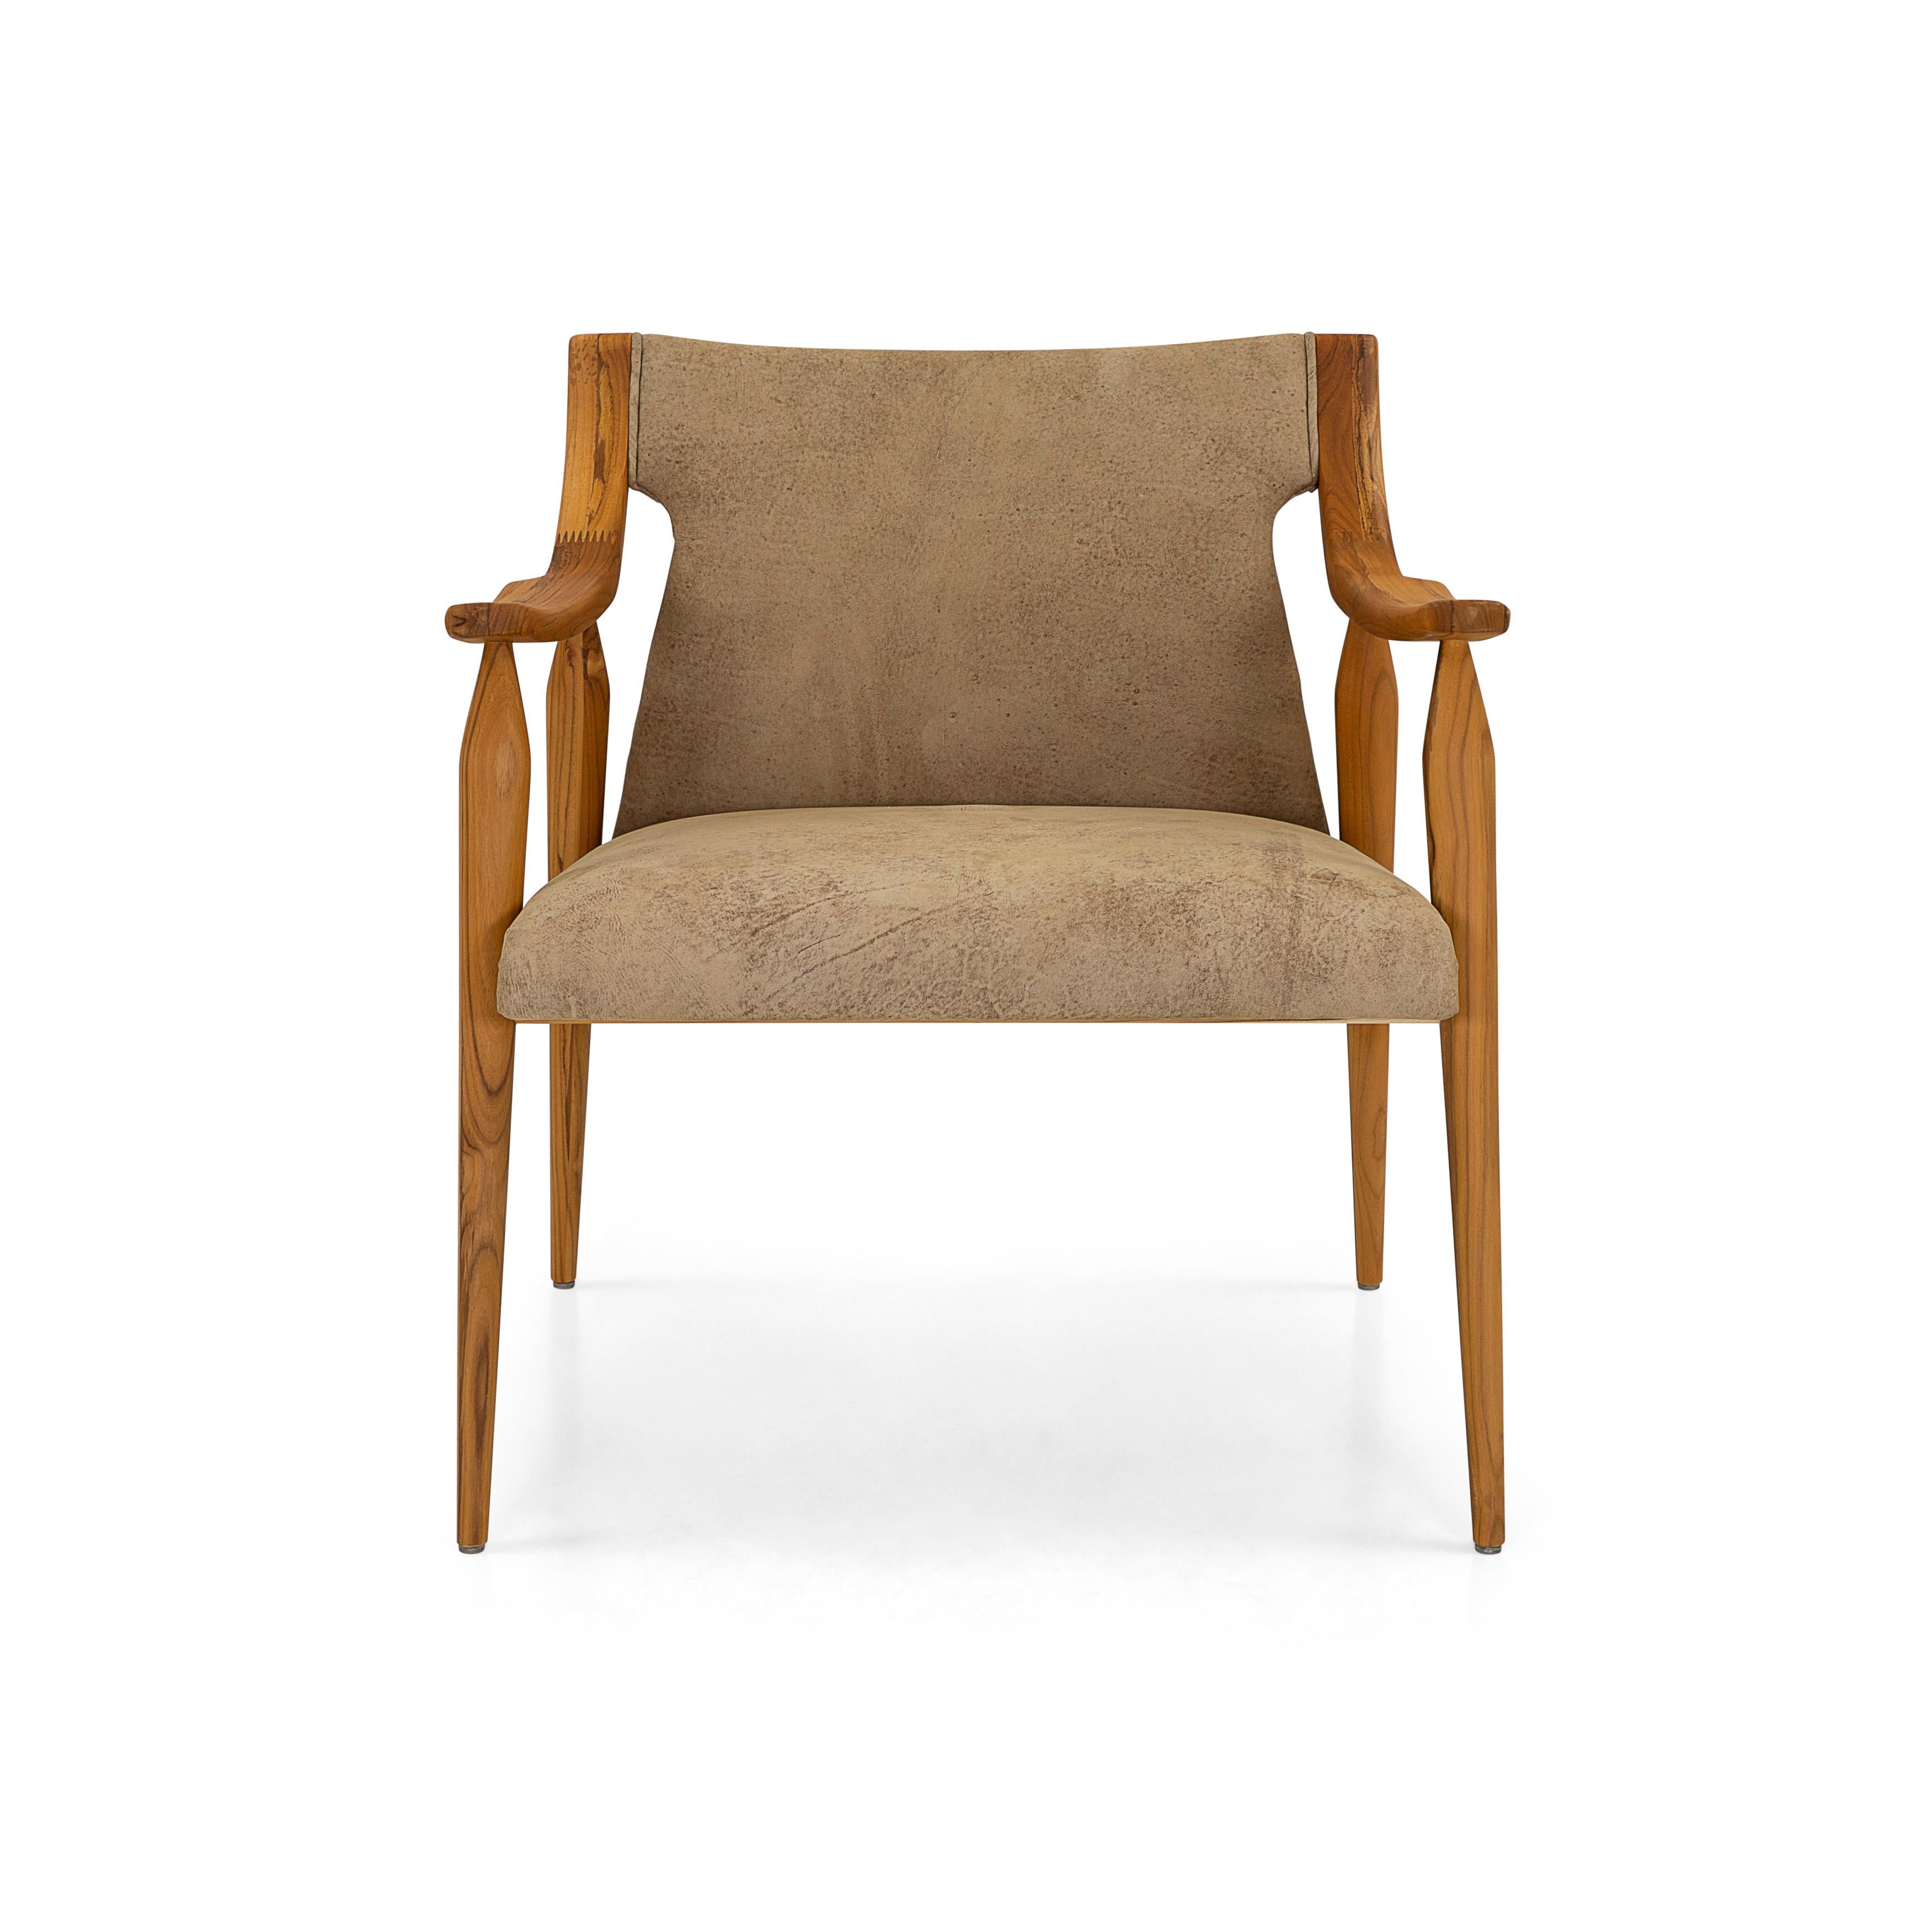 The Mince armchair is a welcoming addition to any room in your modern home decor with its teak wood finish curved arms and spindle legs, and brown beautiful leather for the cushions. This modern chair has a clean minimalist simple design without